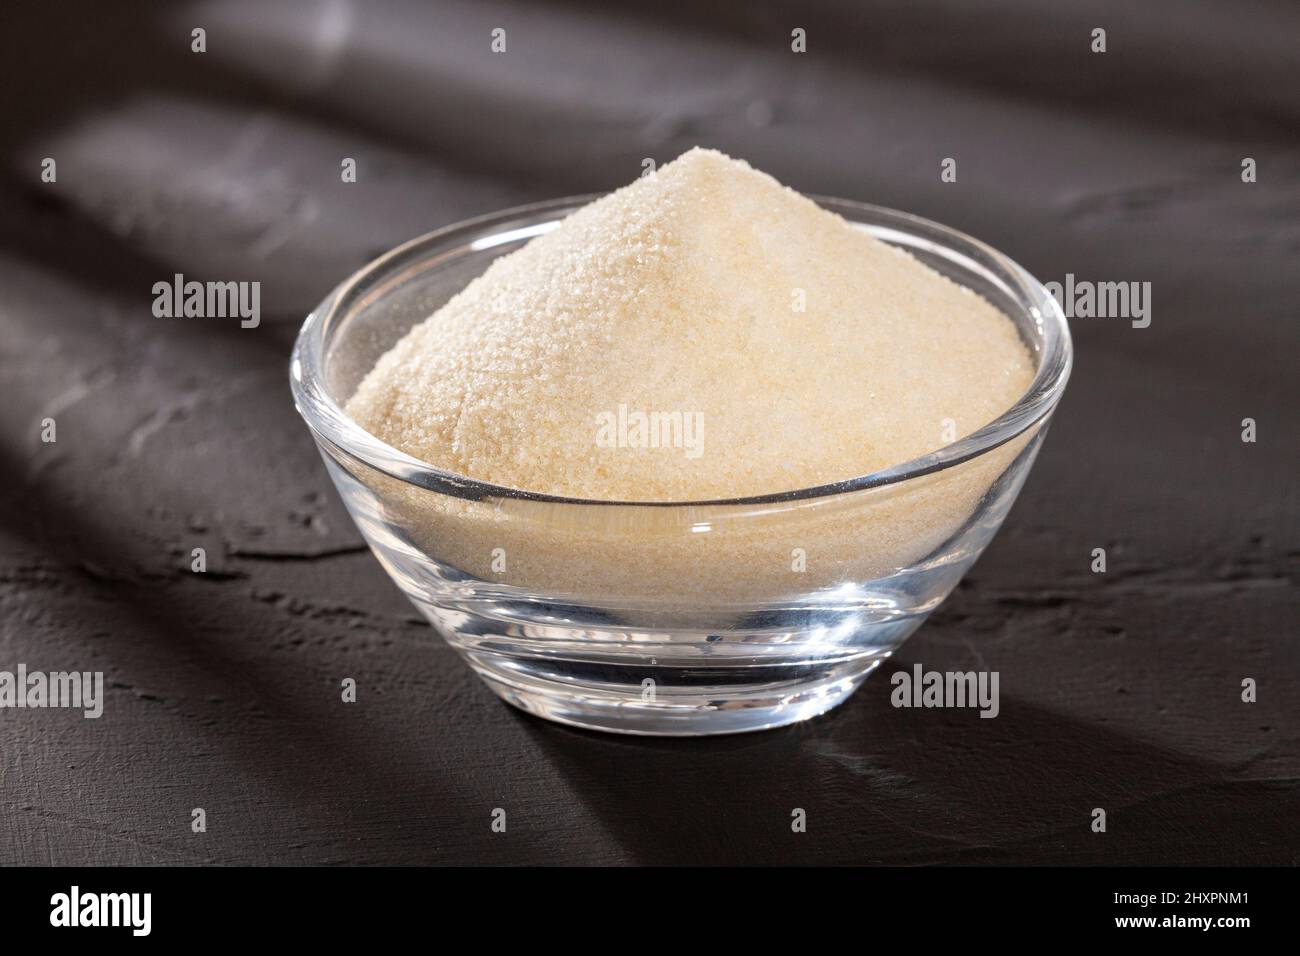 Hydrolyzed Collagen Or Collagen Peptides Protein Nutrient Stock Photo